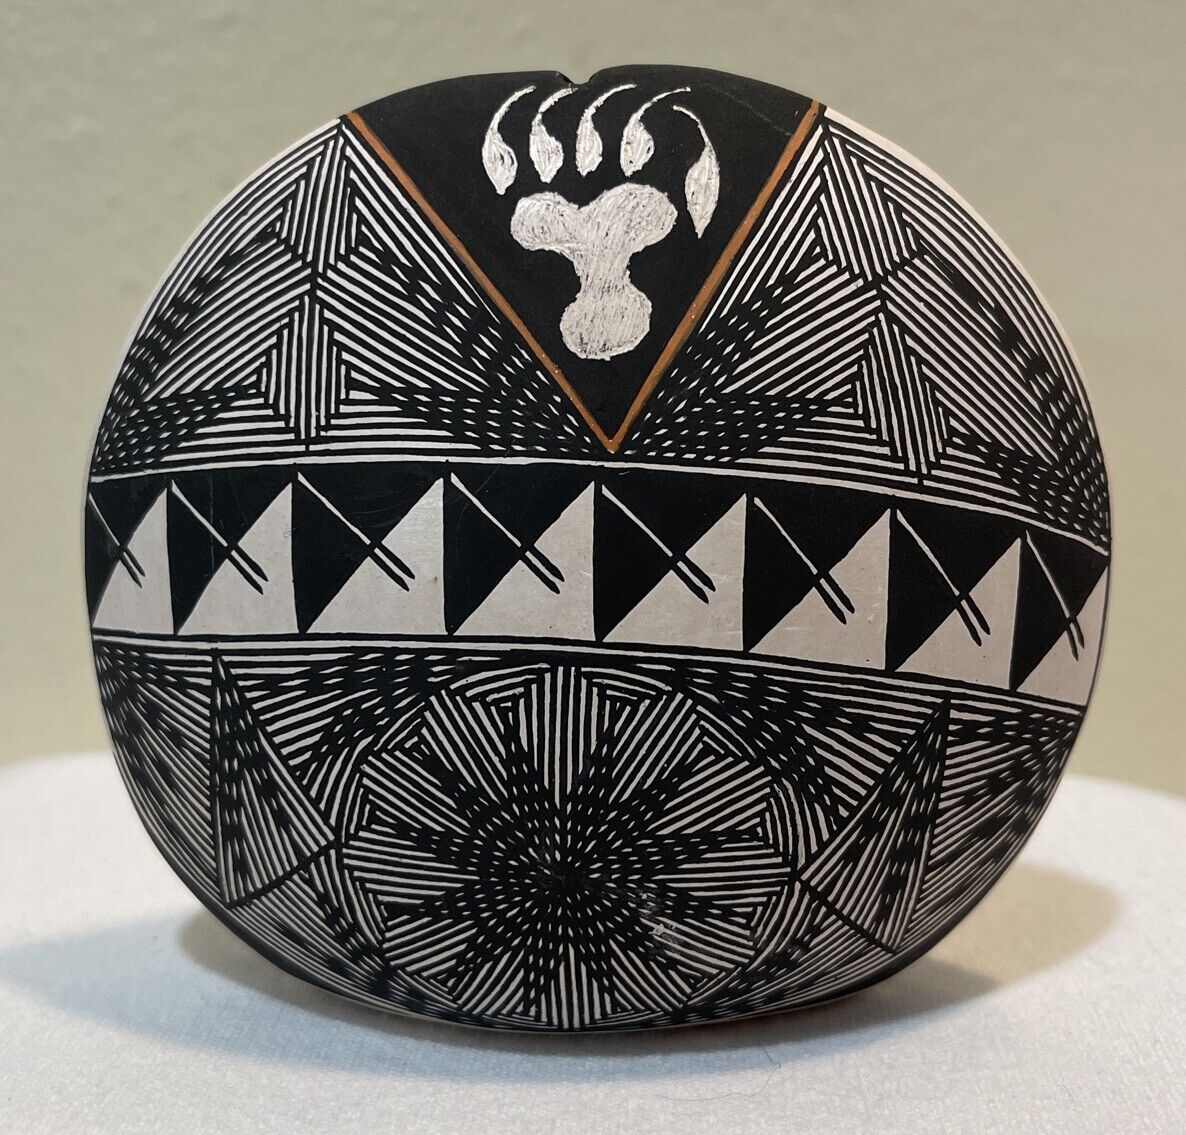 Pueblo Native American Fine Lined Seed Bowl by Brian Delorme SKY CITY Acoma N.M.